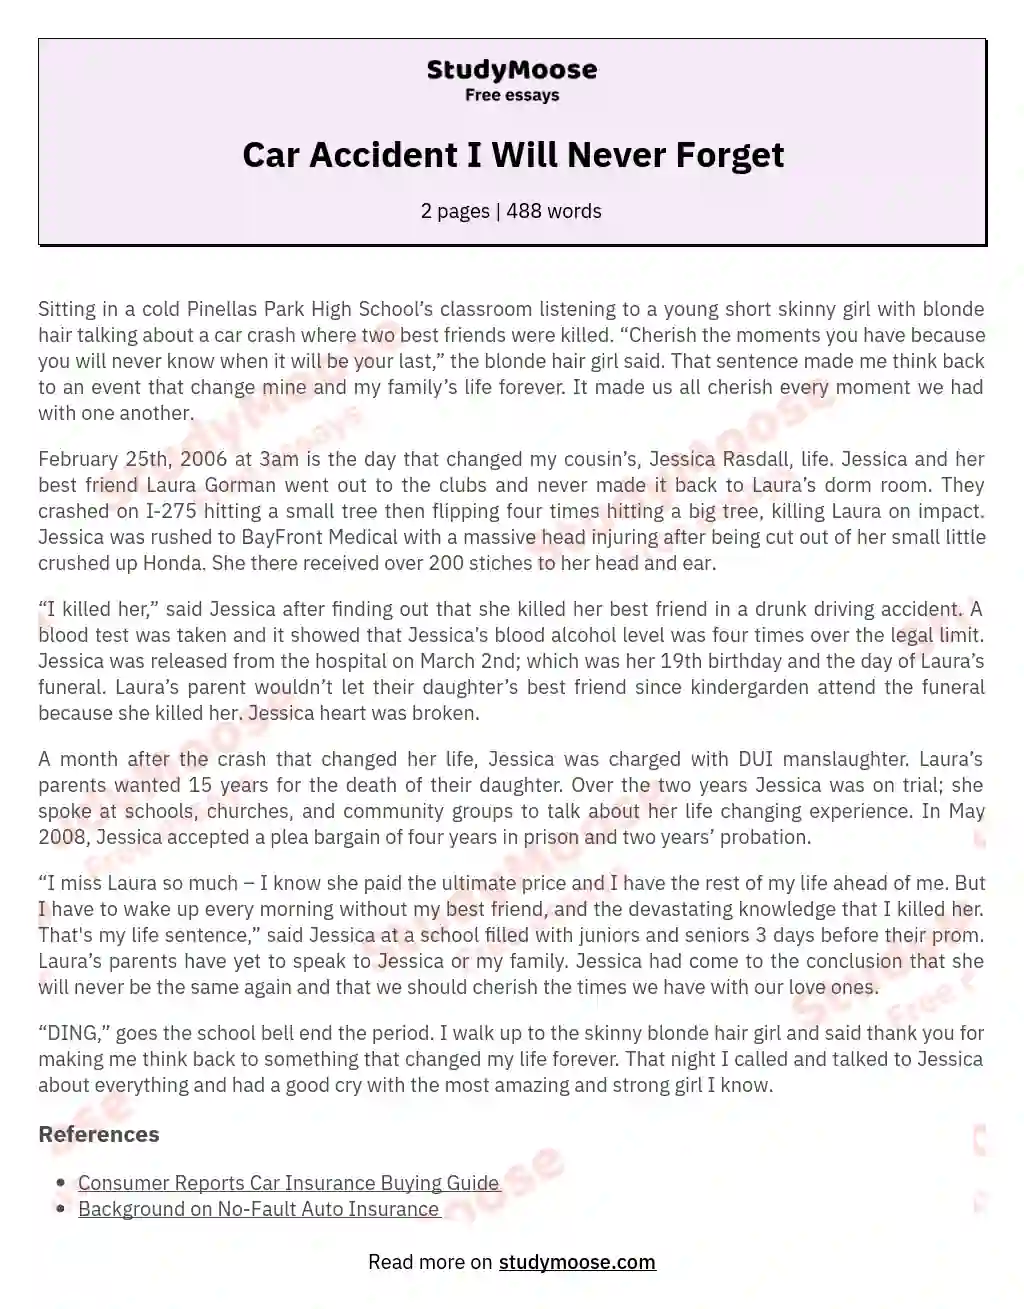 accident story essay